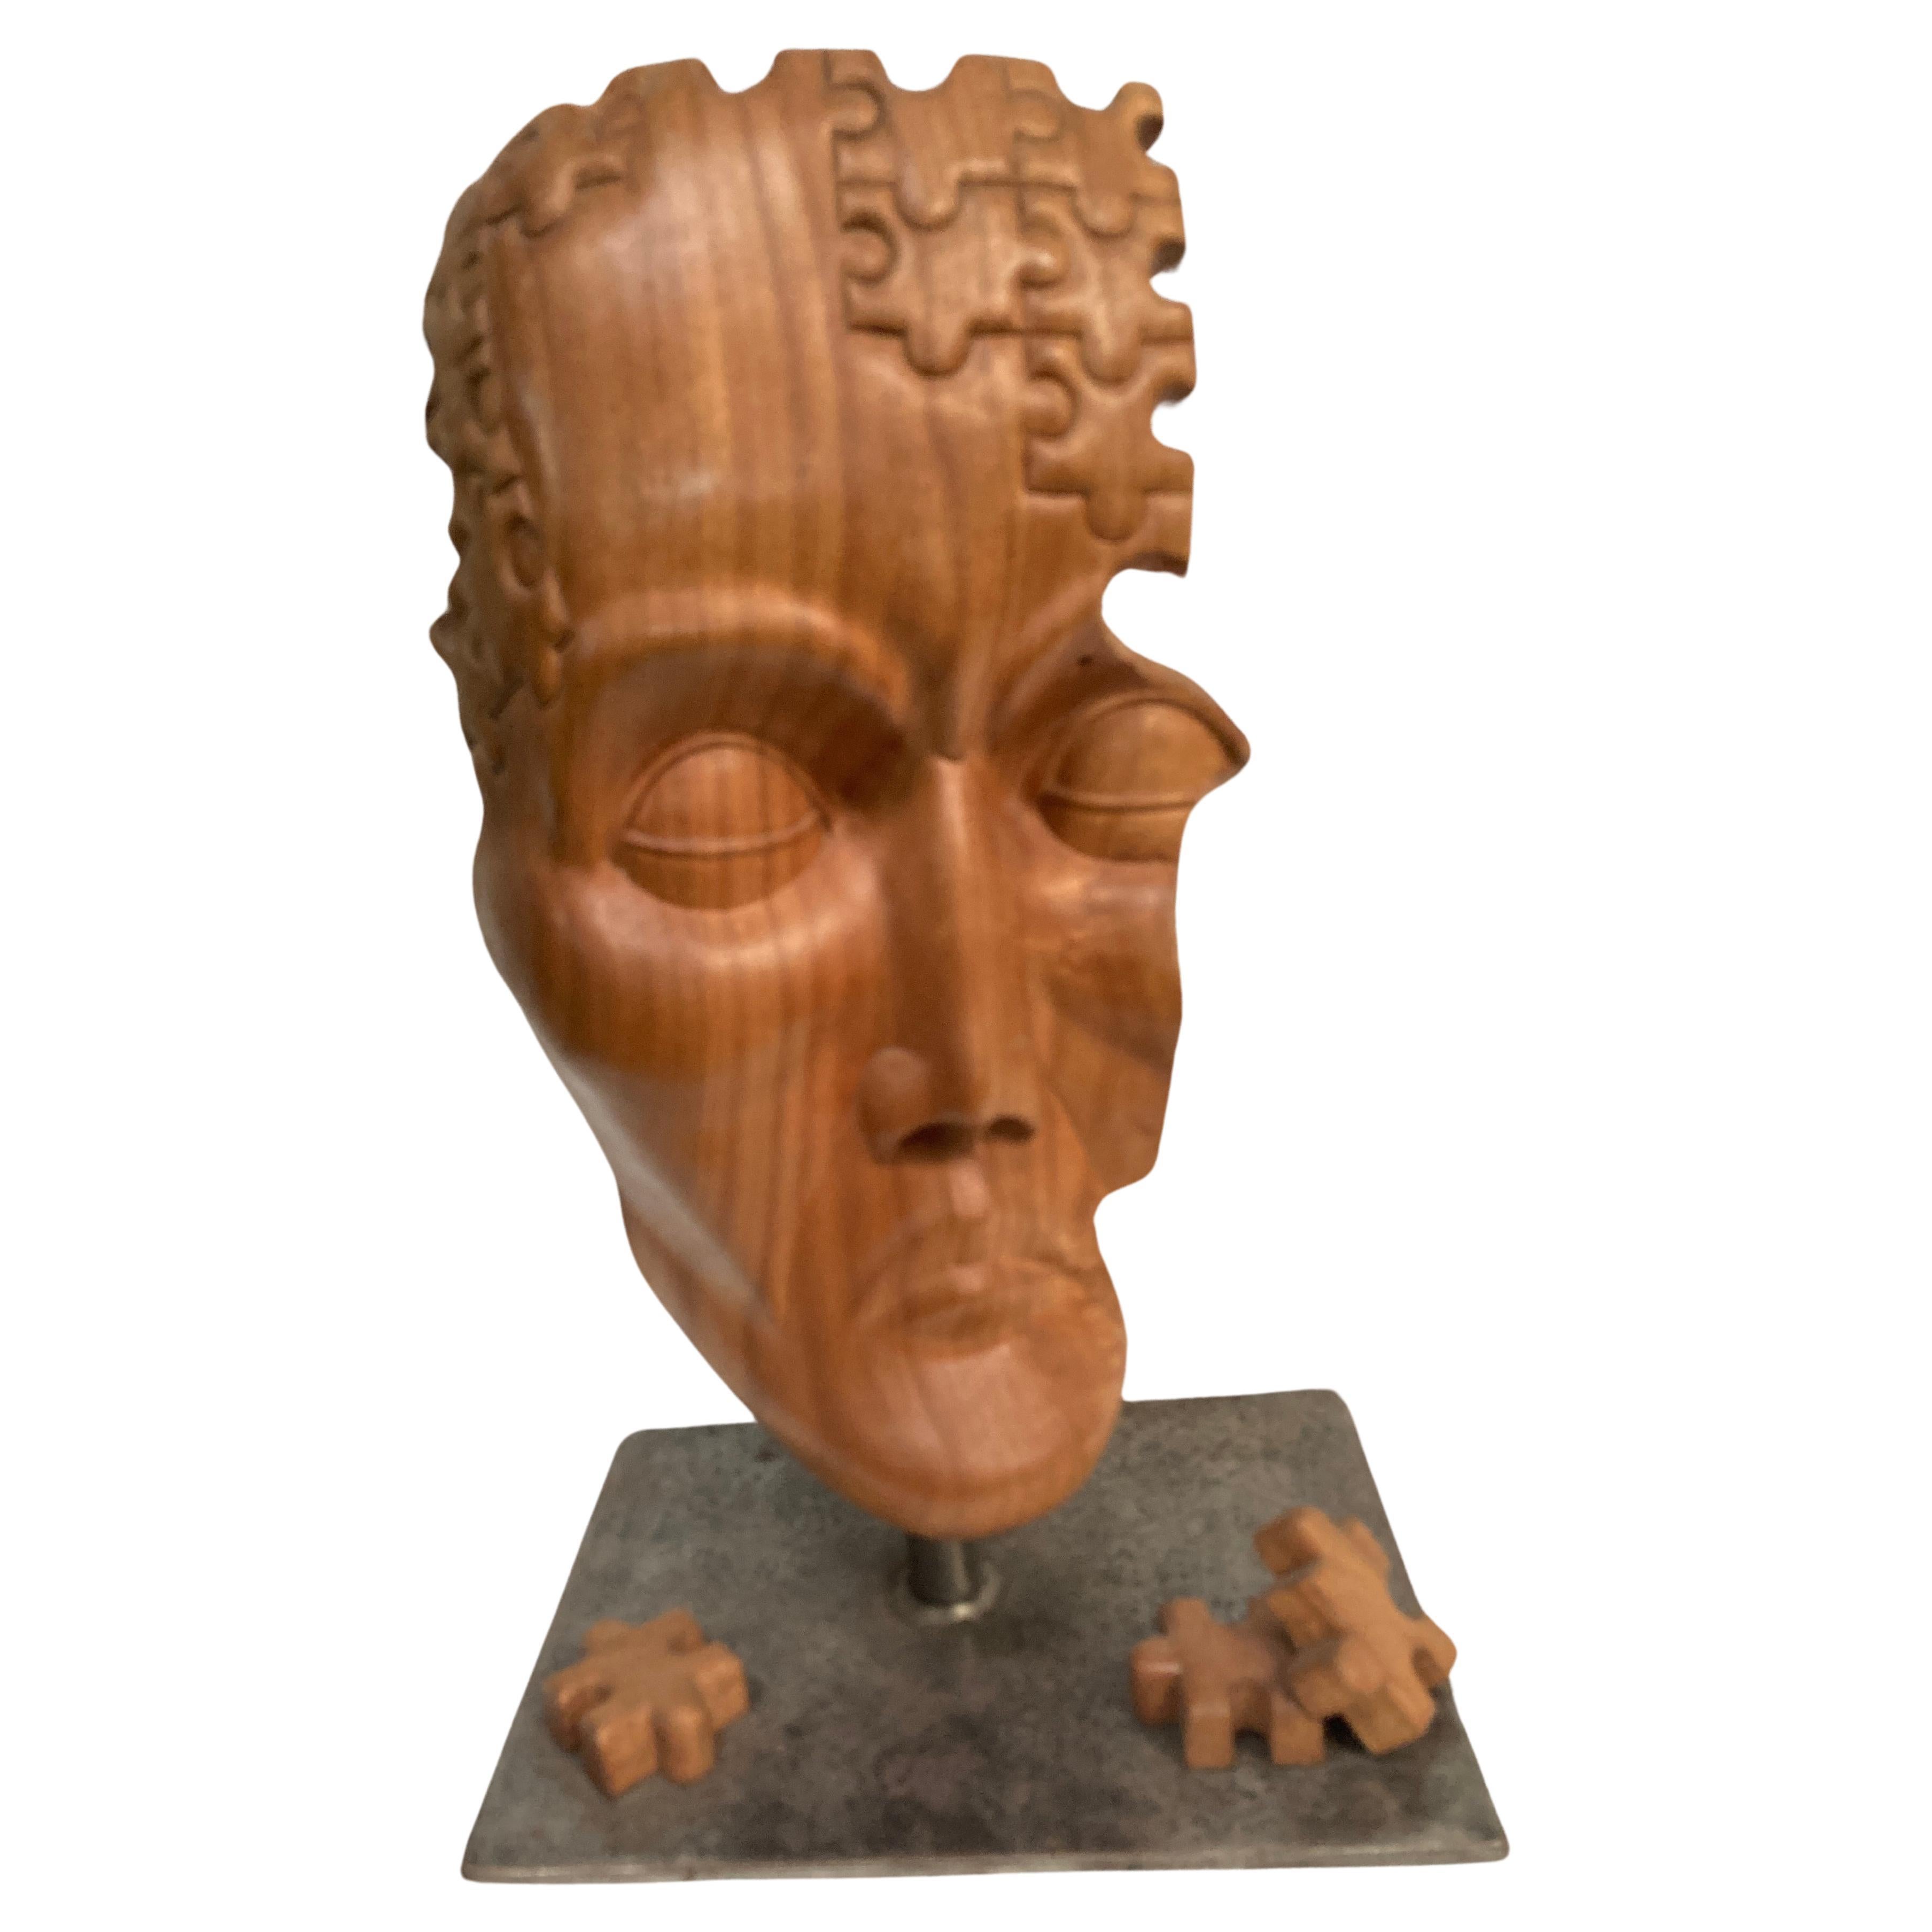 Carved wood abstract head sculpture For Sale